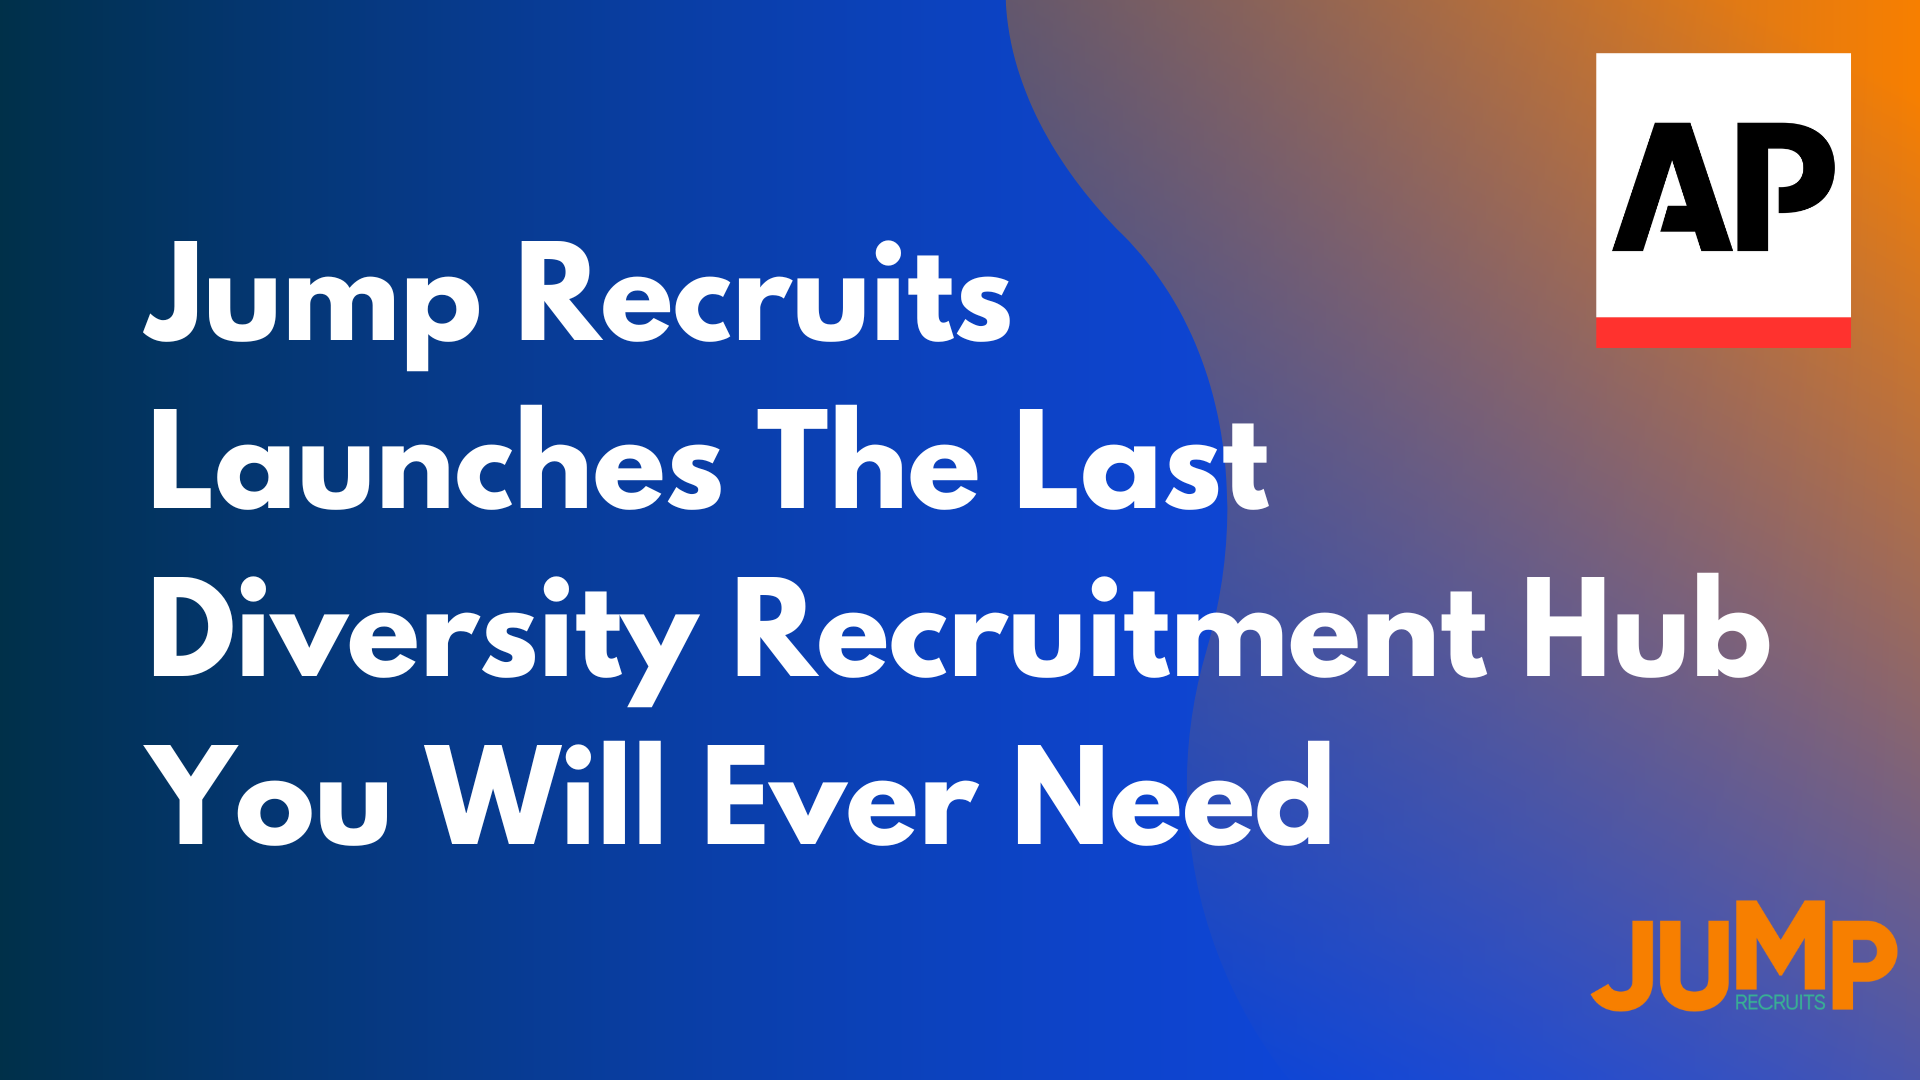 Jump Recruits Launches The Last Diversity Recruitment Hub You Will Ever Need